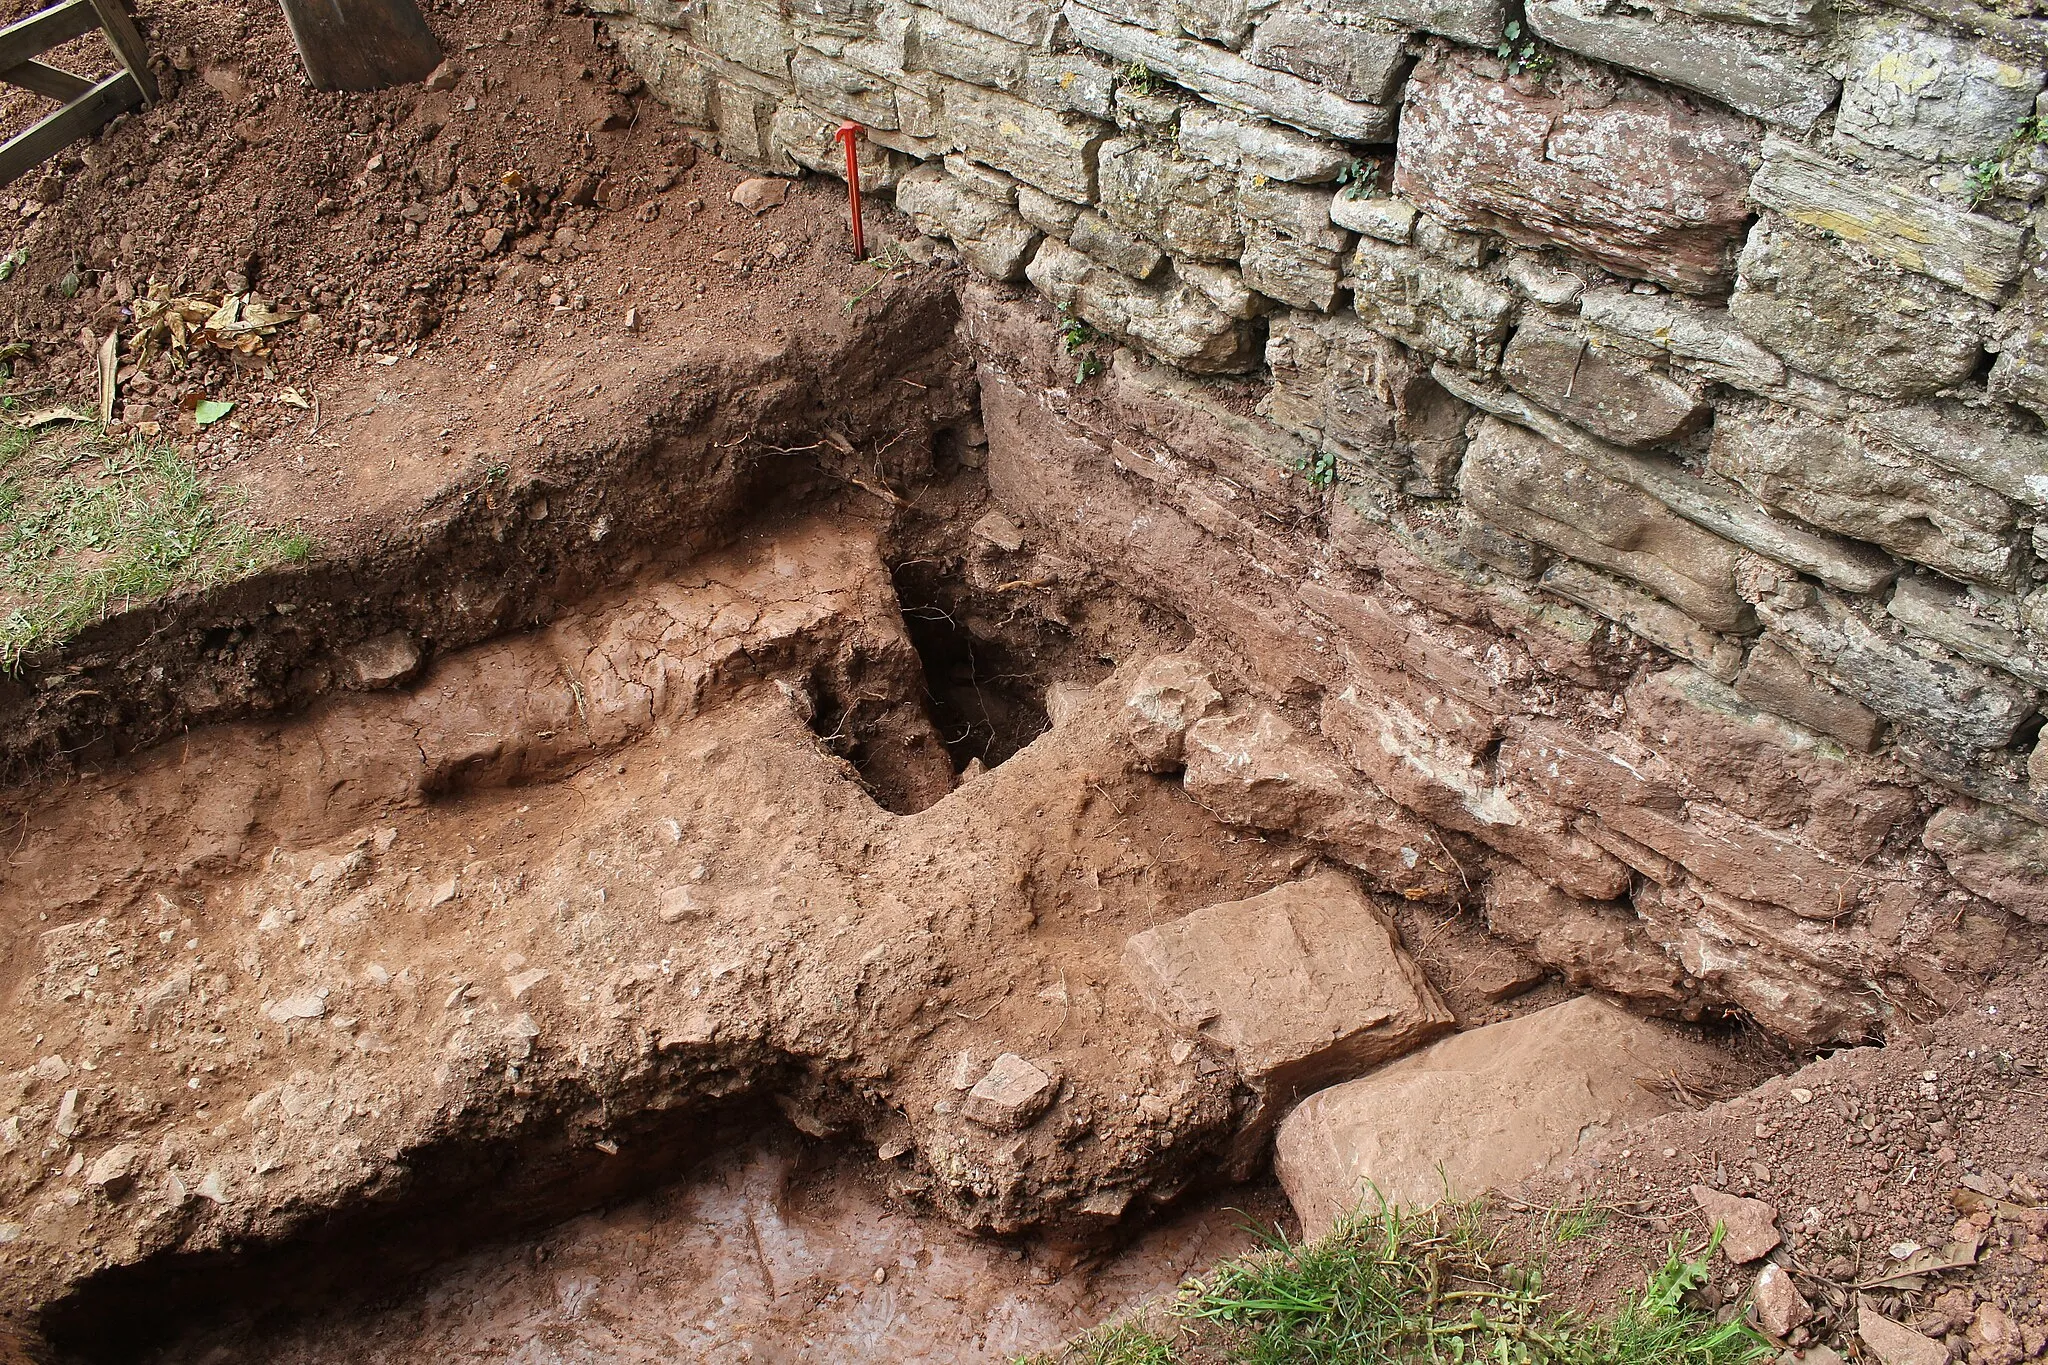 Photo showing: Trench 19 in the excavations at Berkeley Castle as part of the University of Bristol's Dig Berkeley.